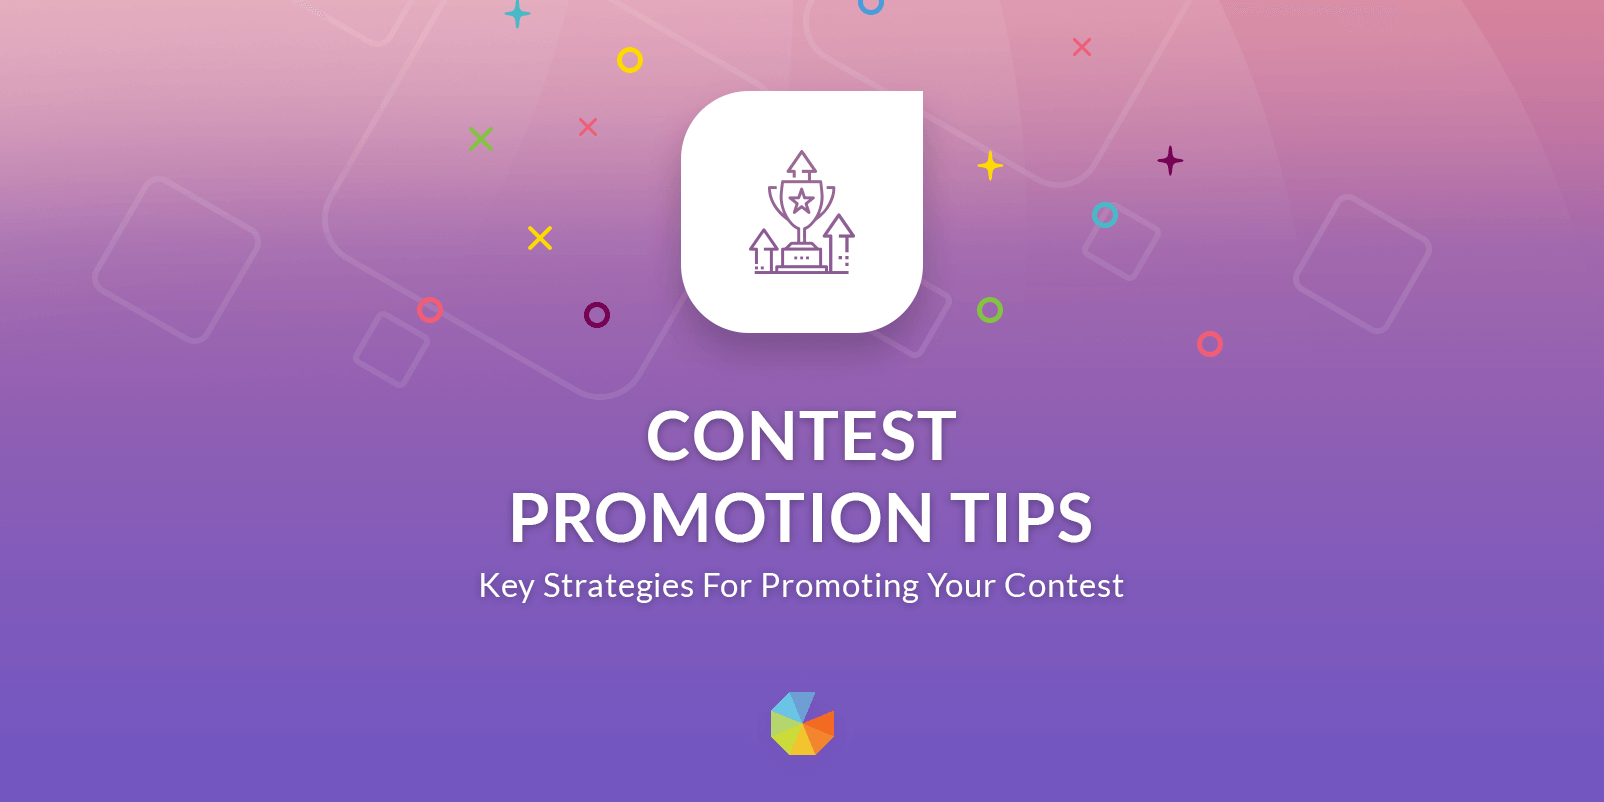 Contest promotion tops, key strategies for promoting your contest